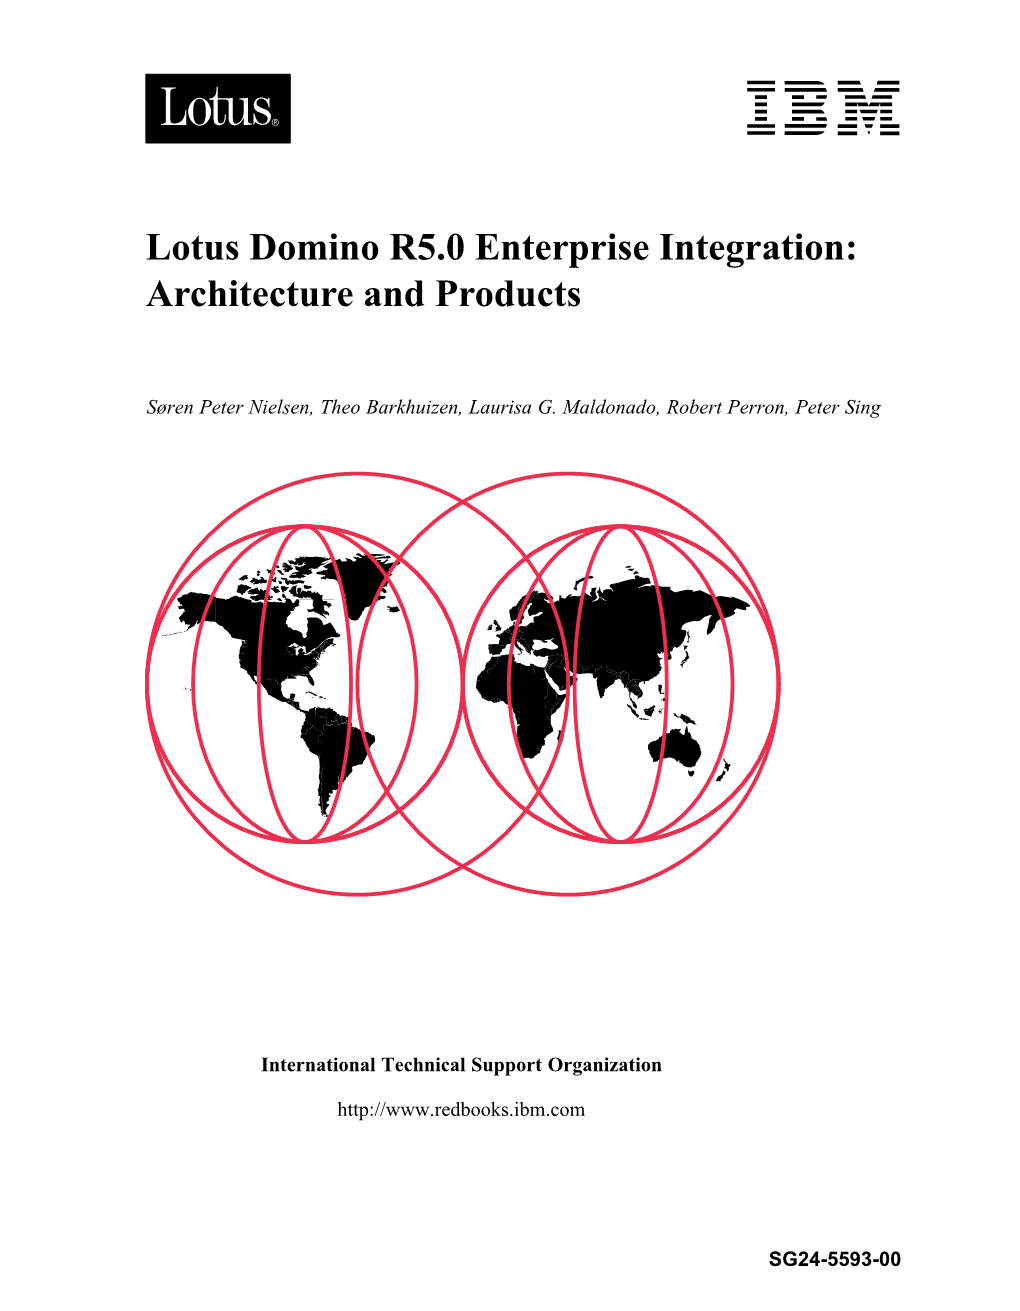 Lotus Domino R5.0 Enterprise Integration: Architecture and Products